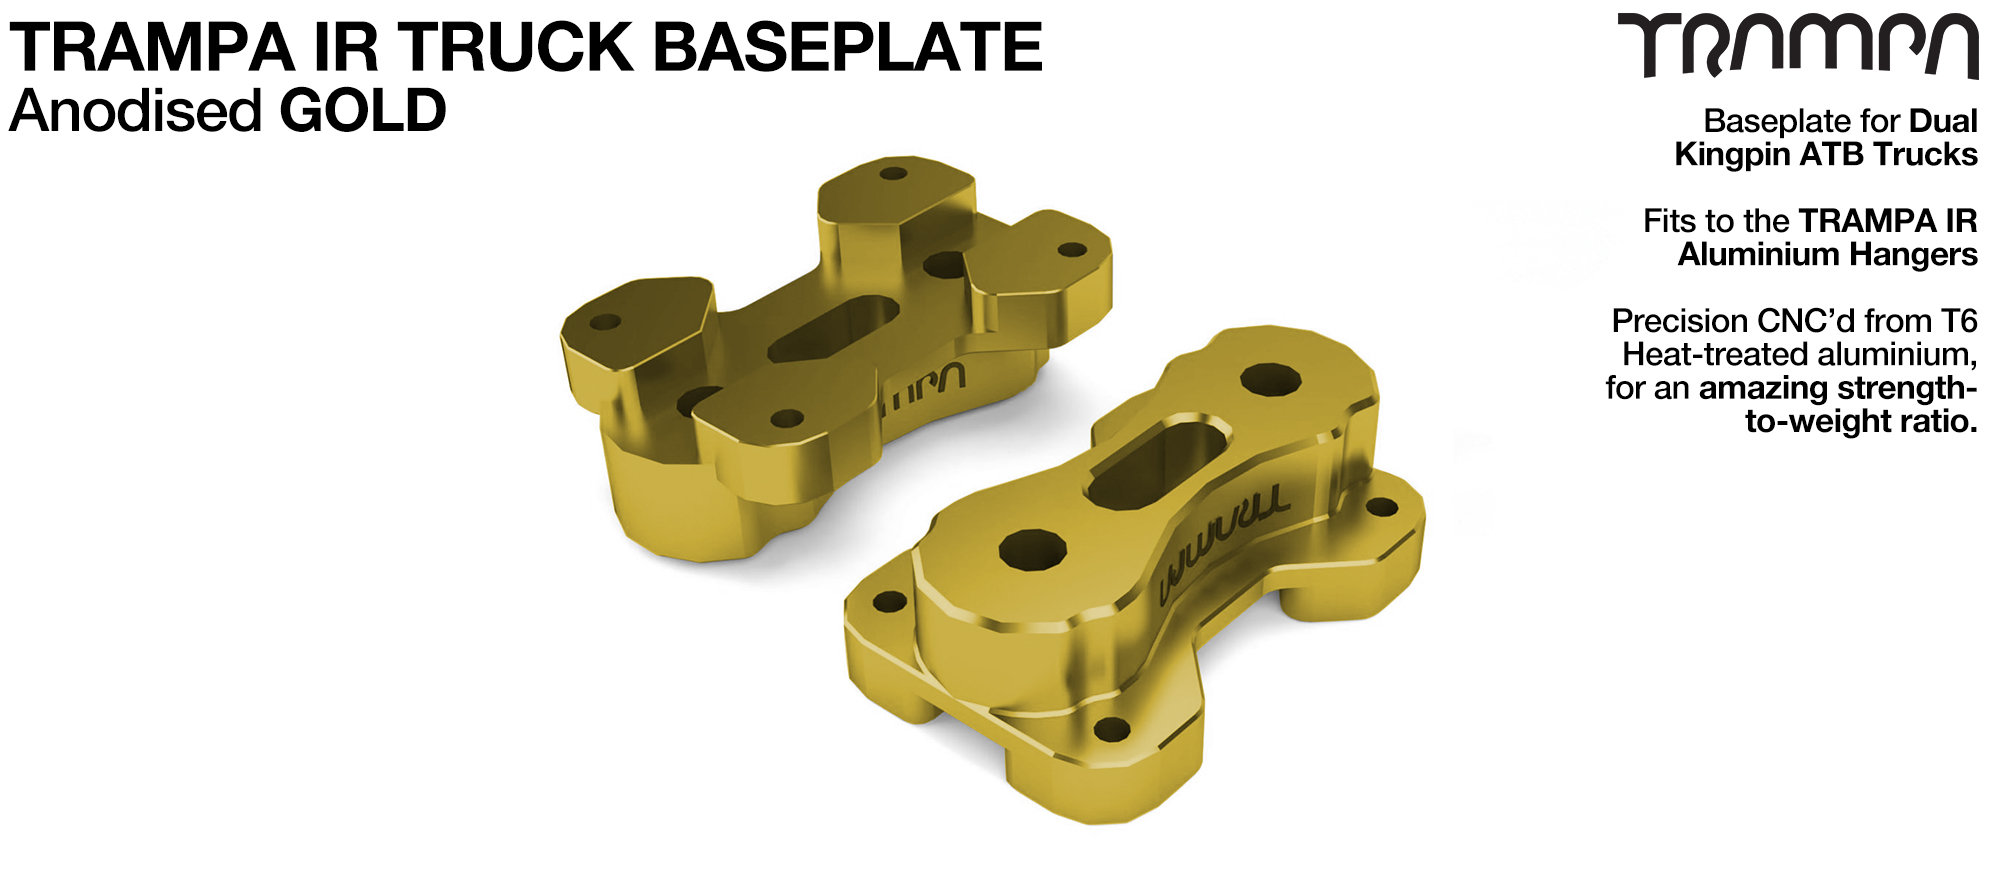 TRAMPA IR BASEPLATE - CNC Precision made TRAMPA IR Trucks are super light & Packed with performance - GOLD